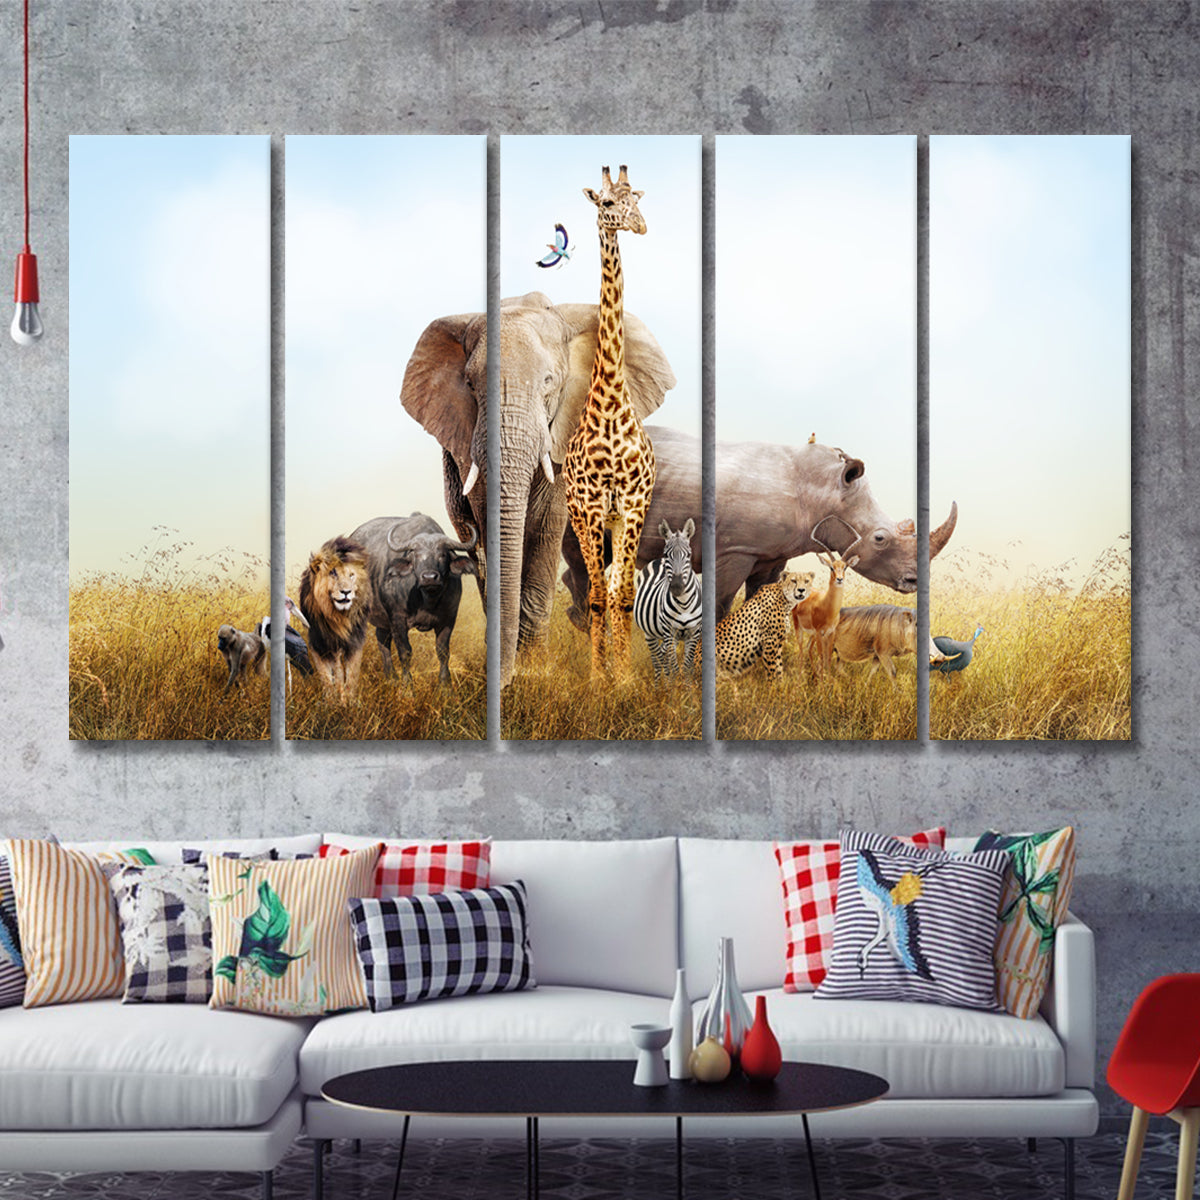 Nursery/ Family Room Decor The first to apologize is the 